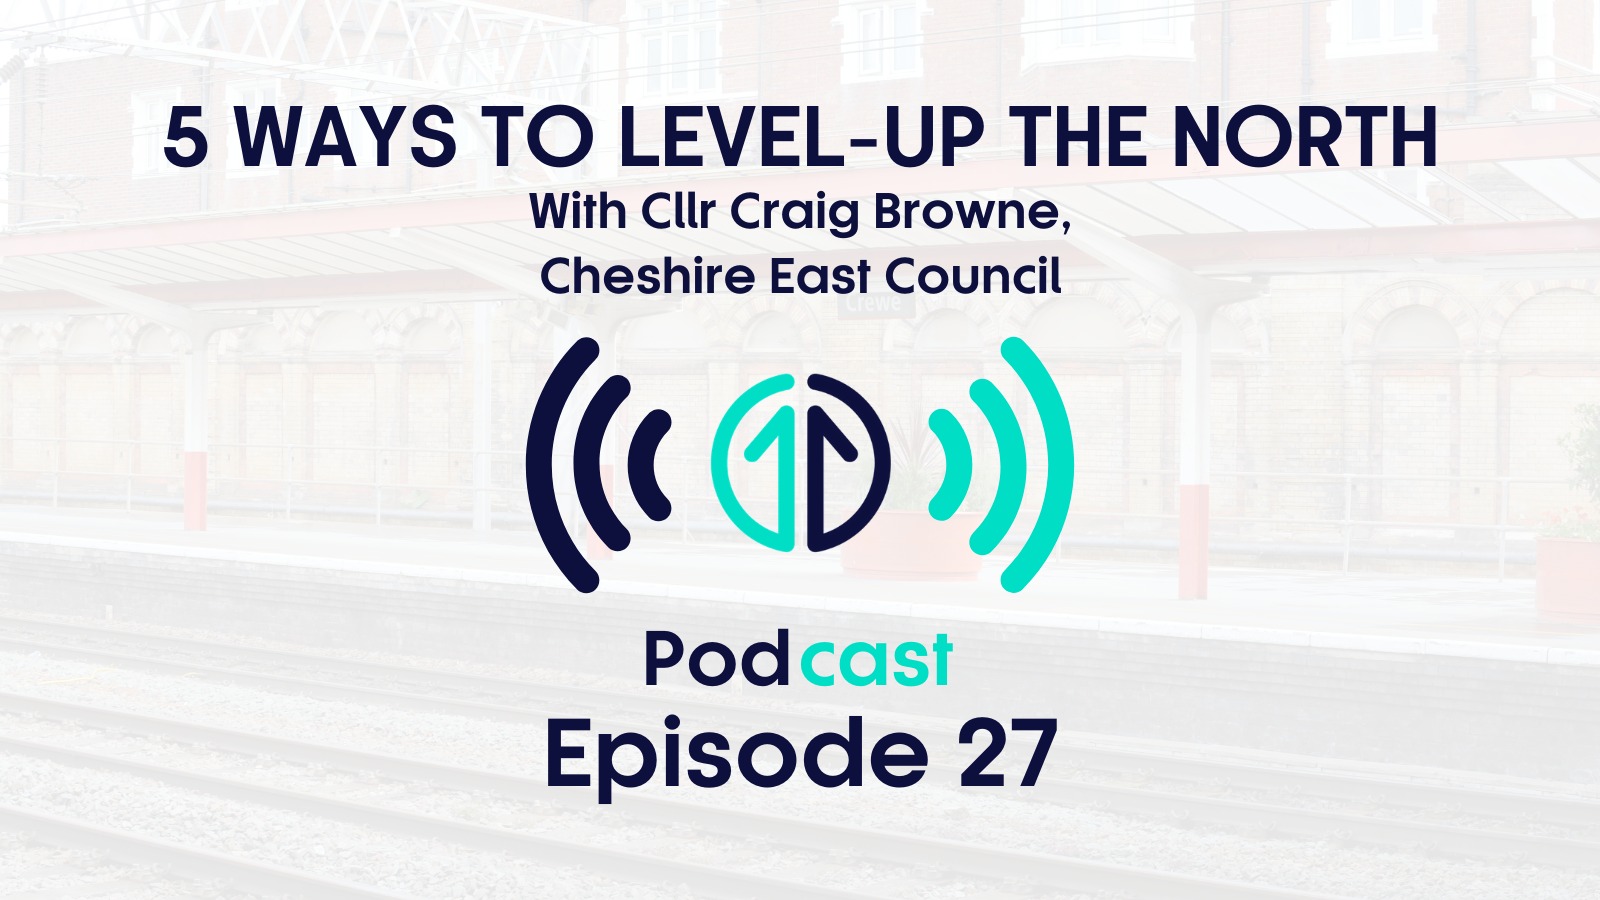 5 ways to level up the North with Councillor Craig Browne, Cheshire East | Episode 27